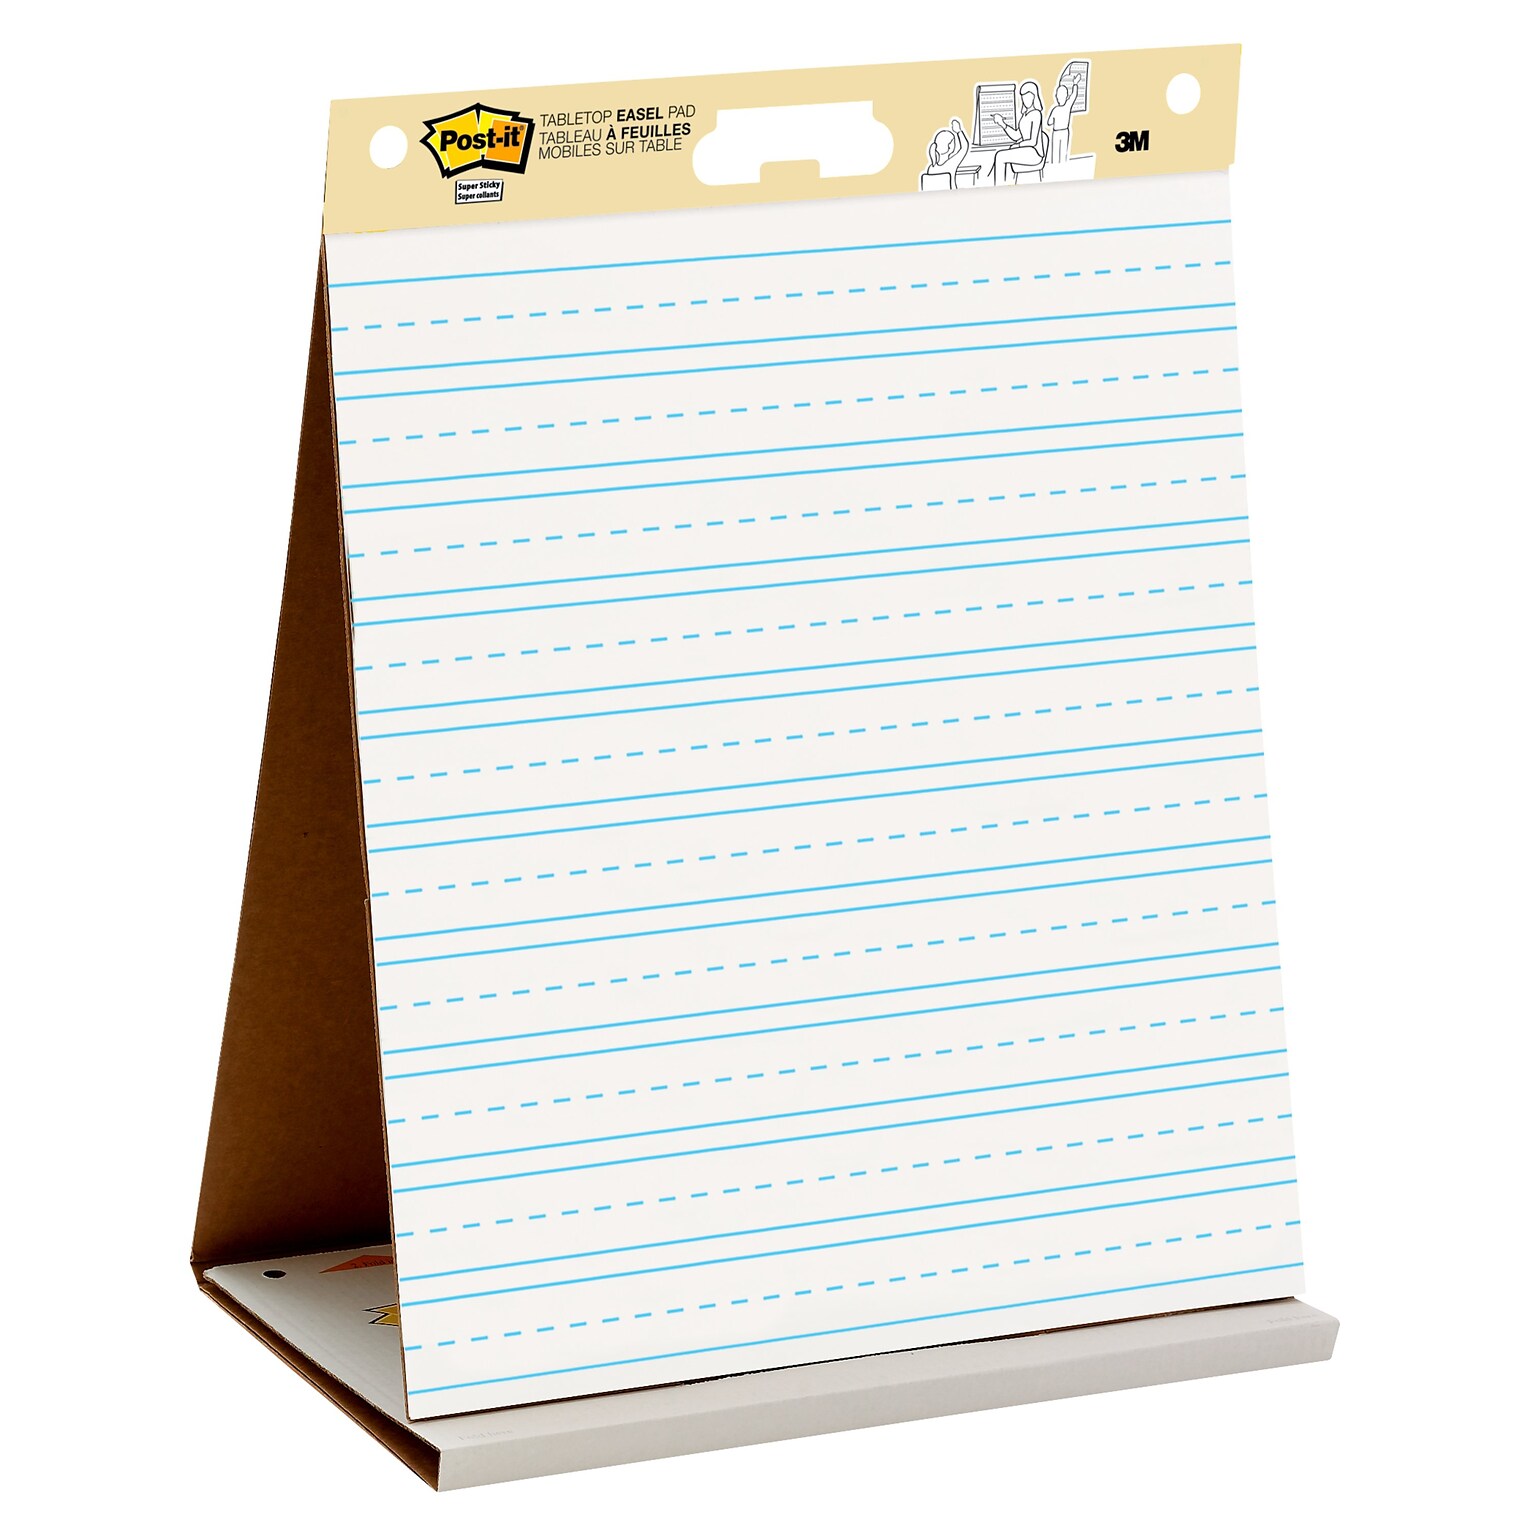 Post-it® Super Sticky Tabletop Easel Pad, 20 x 23, Primary Lined, 20 Sheets/Pad (563PRL)